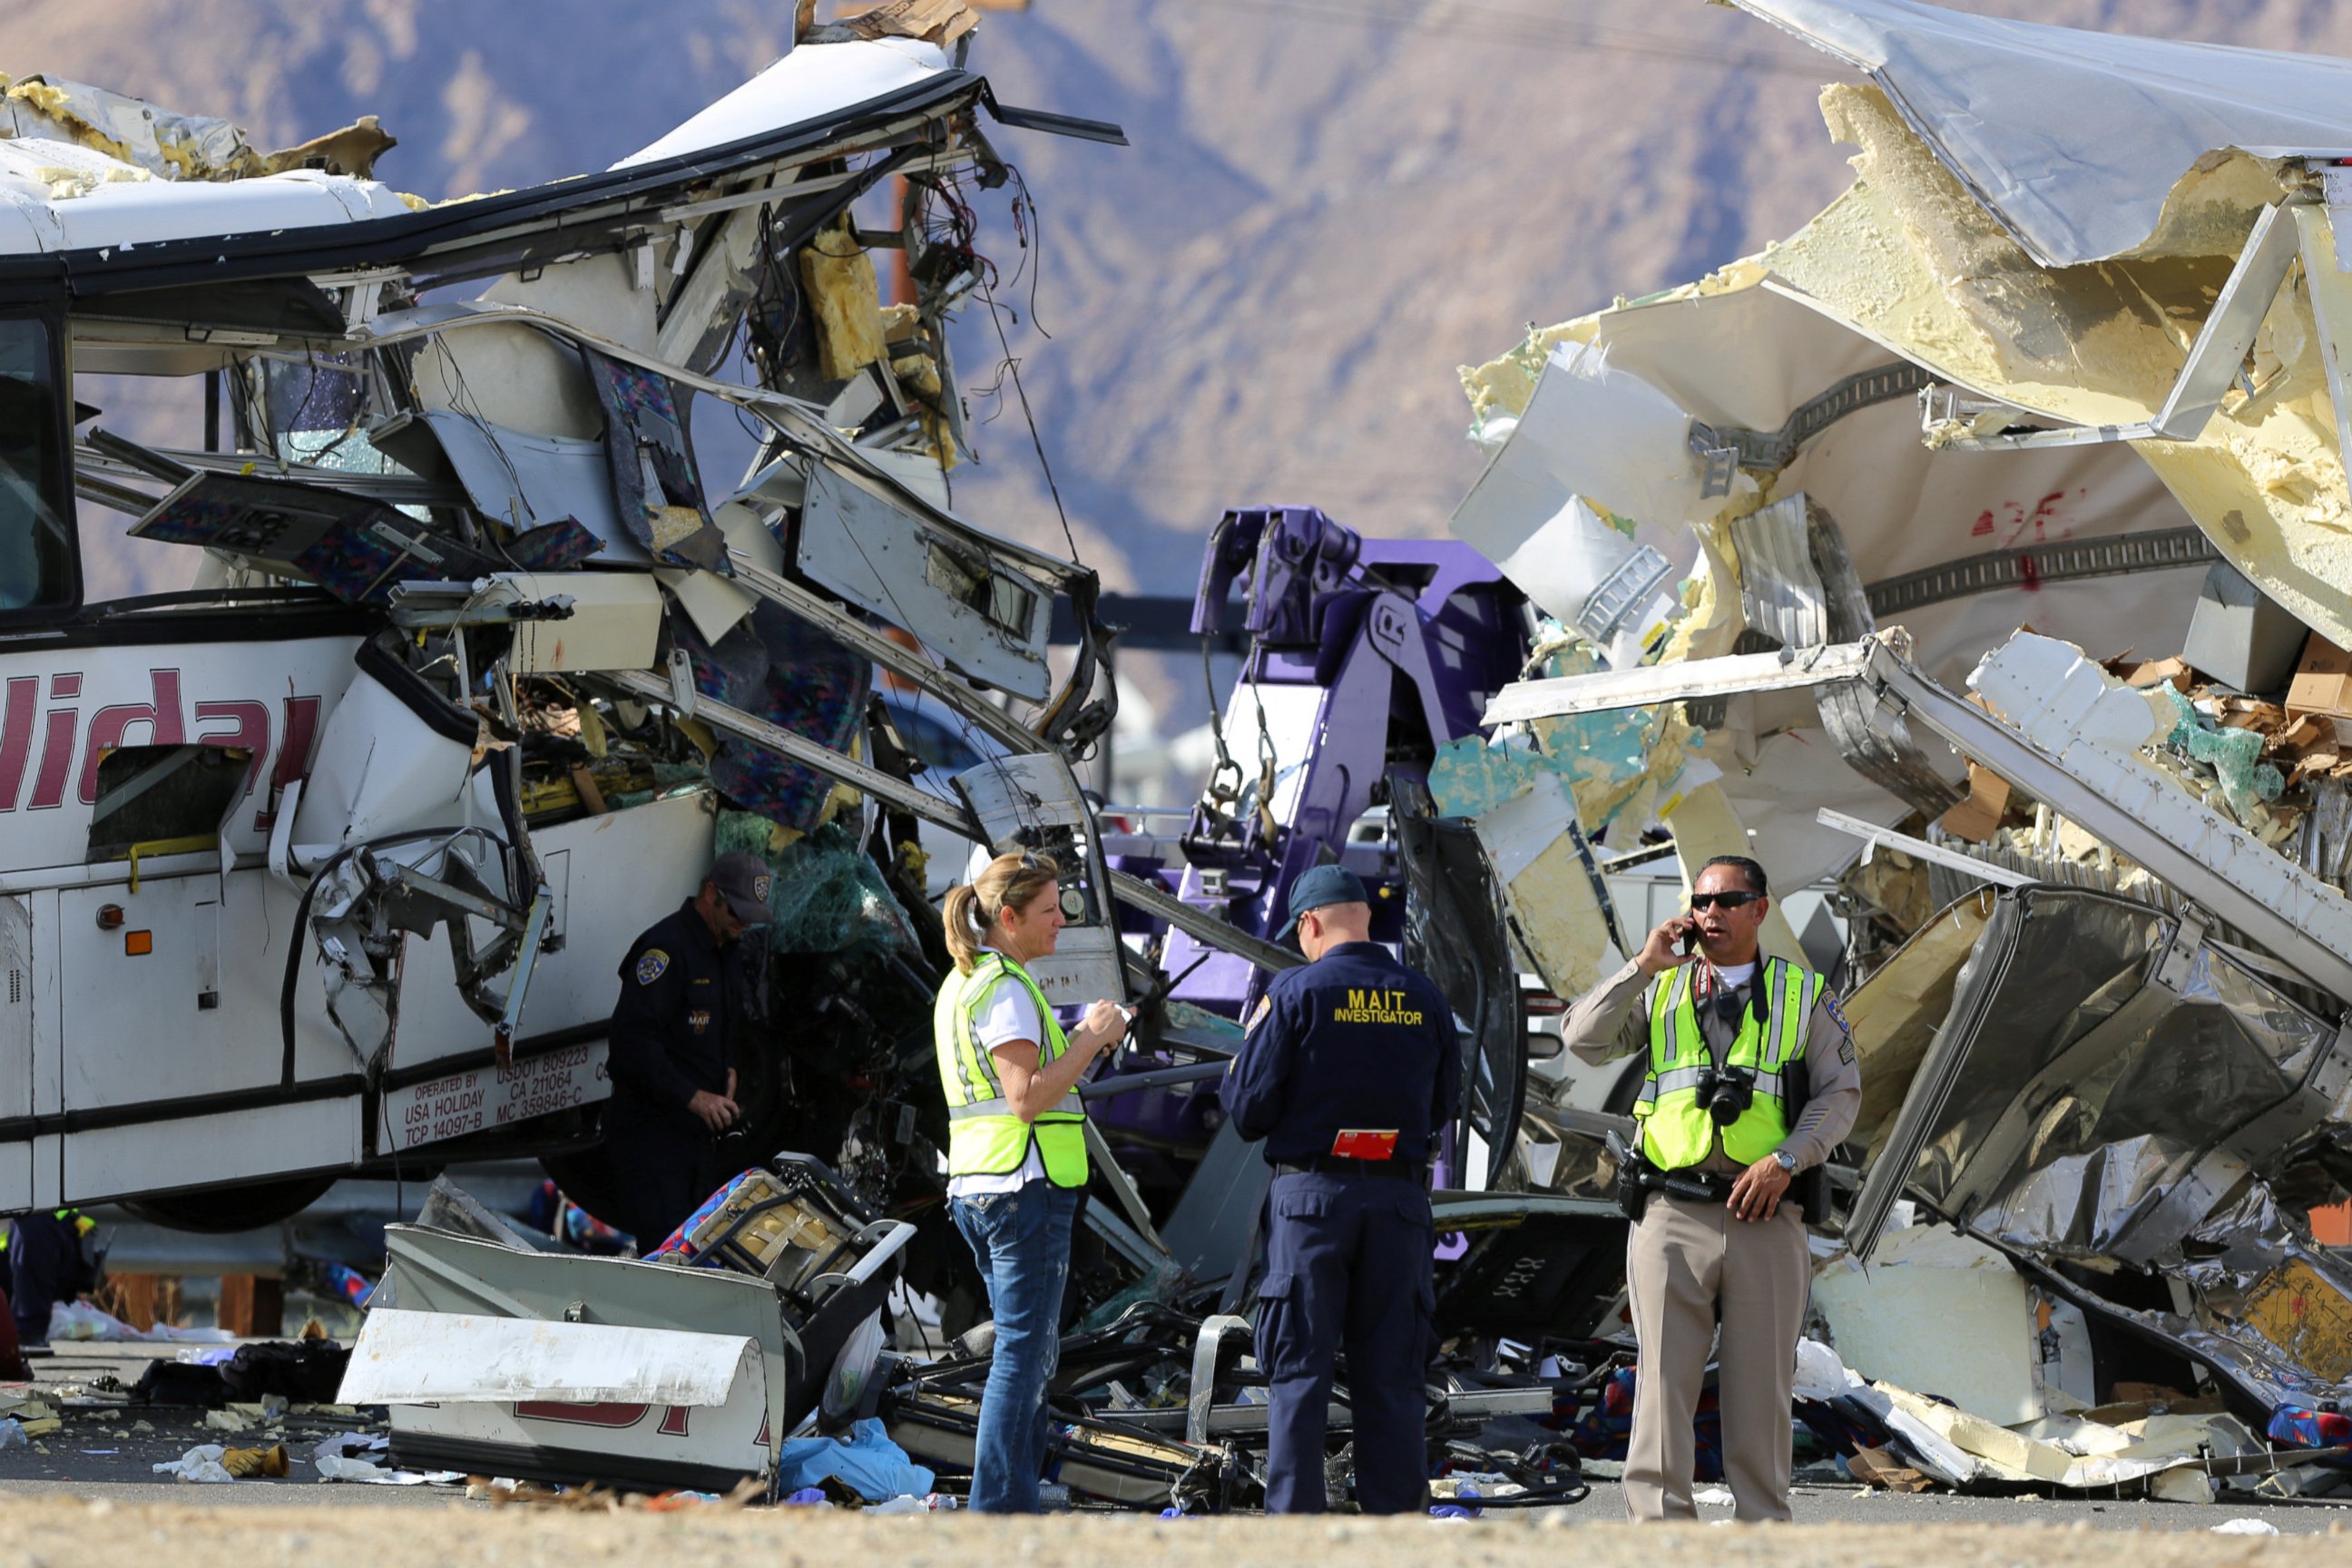 PHOTO: Investigators speak to each other at the scene of a mass casualty bus crash on the westbound Interstate 10 freeway near Palm Springs, California, Oct. 23, 2016.